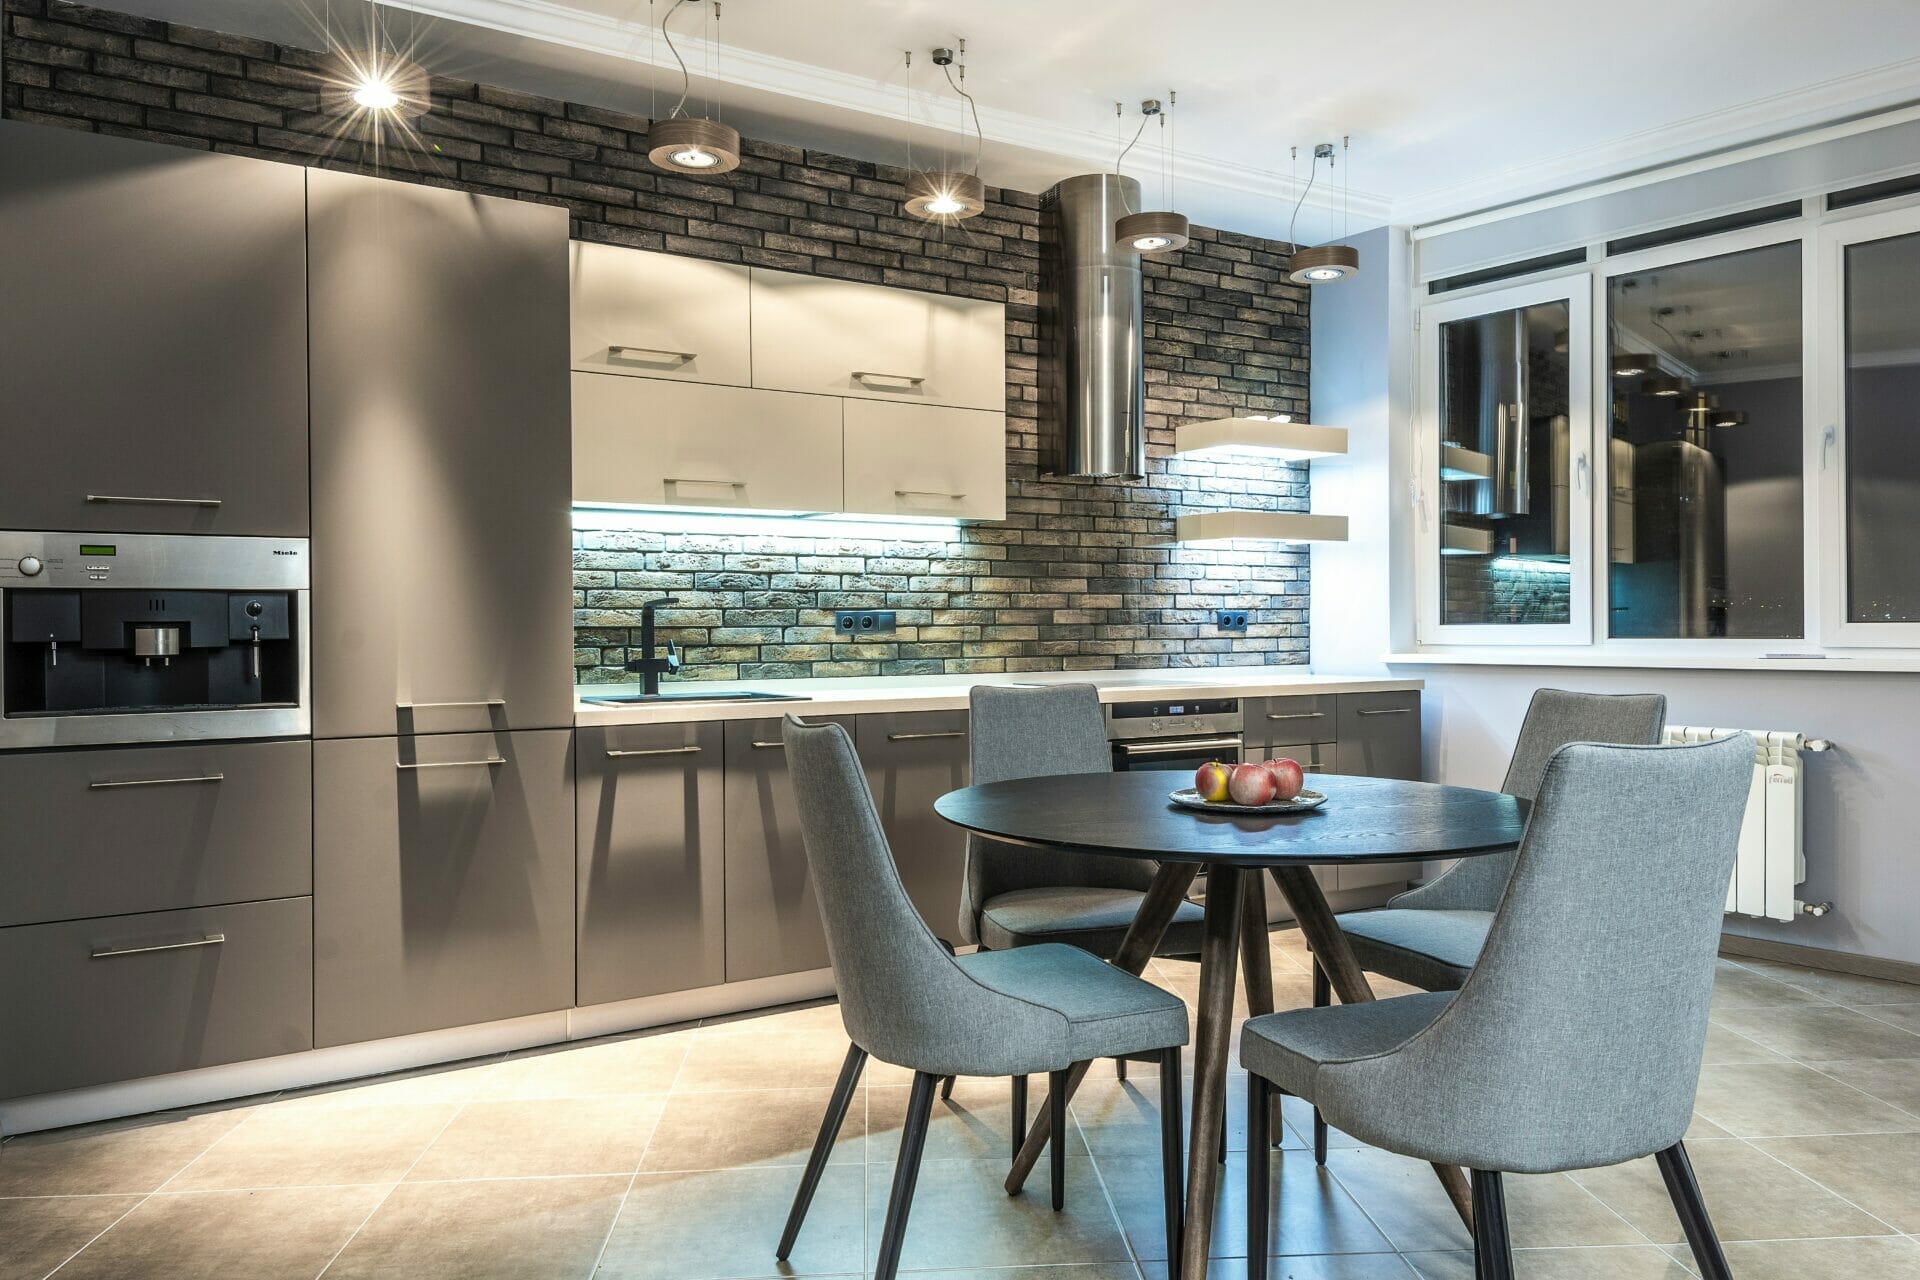 Transforming the kitchen with Smart Tiles